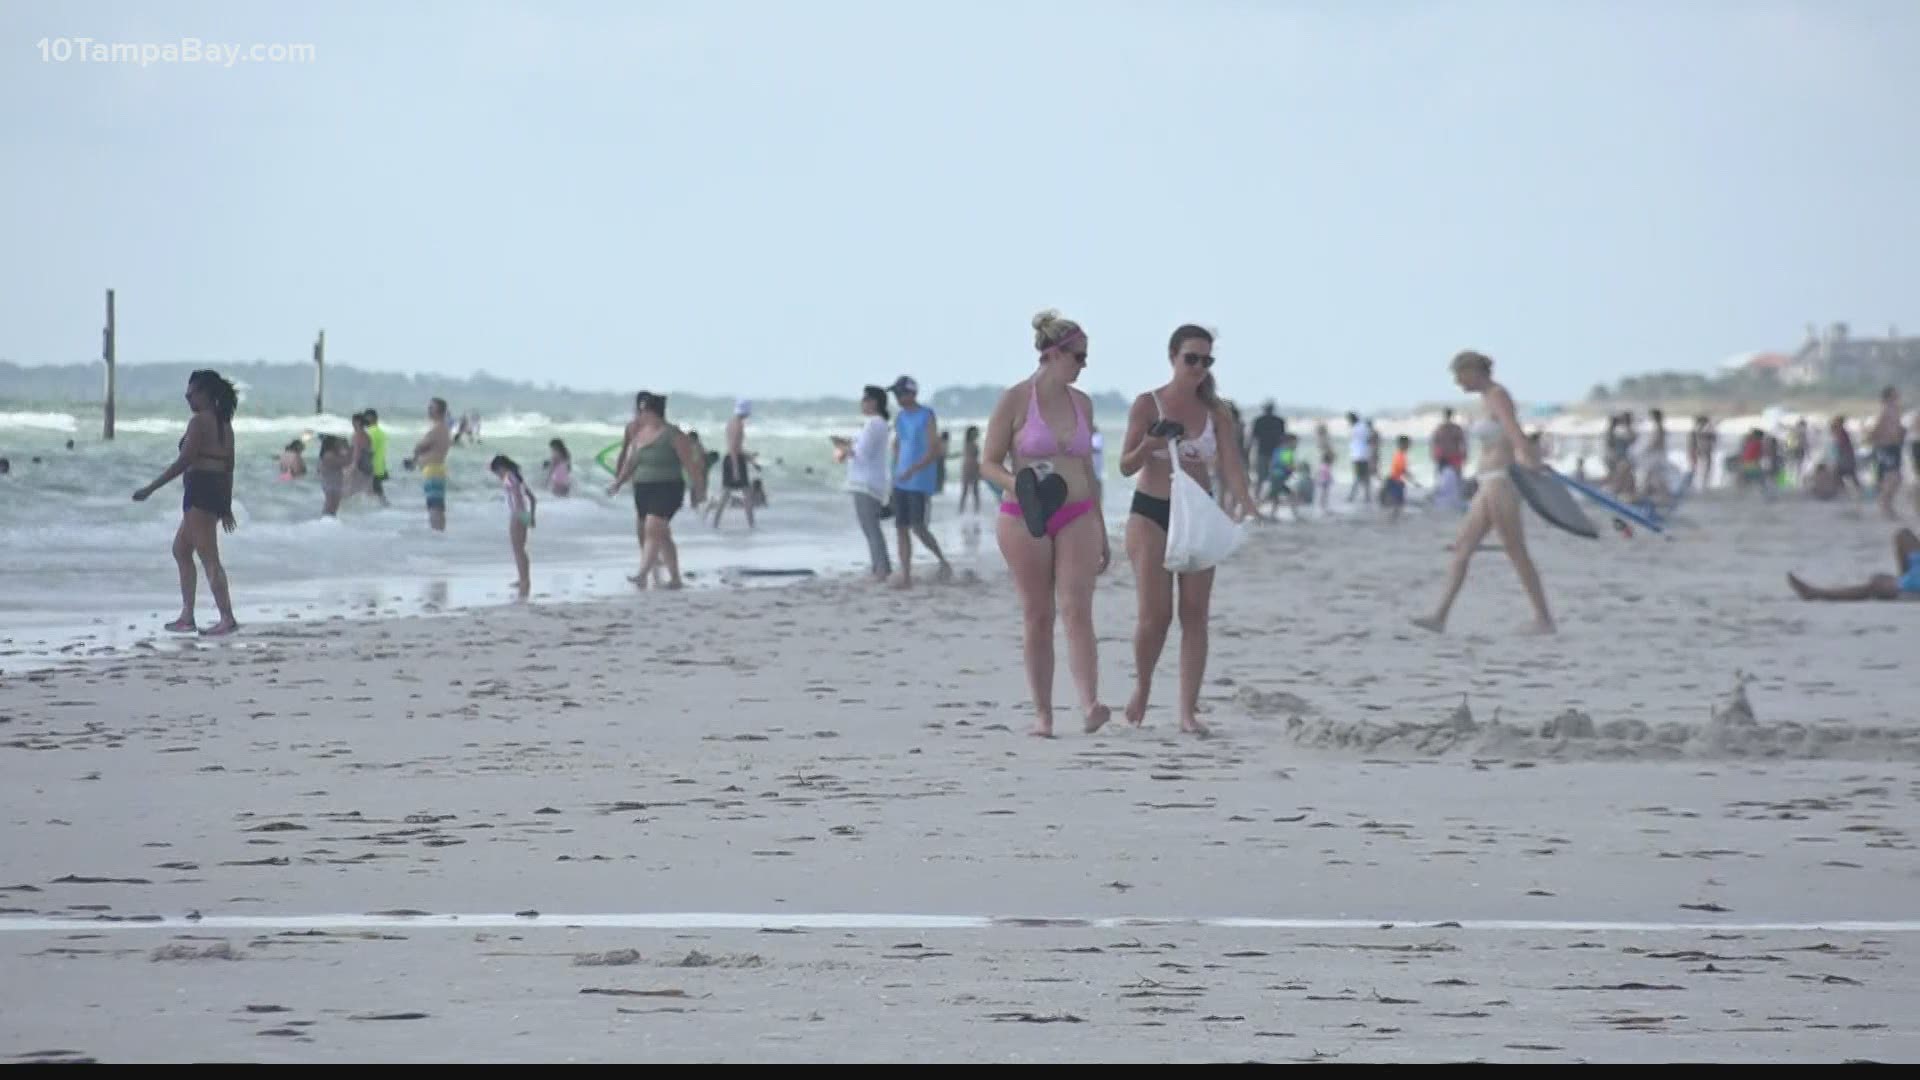 People crowd Clearwater Beach despite FWC's report of medium concentrations of Karenia Brevis.